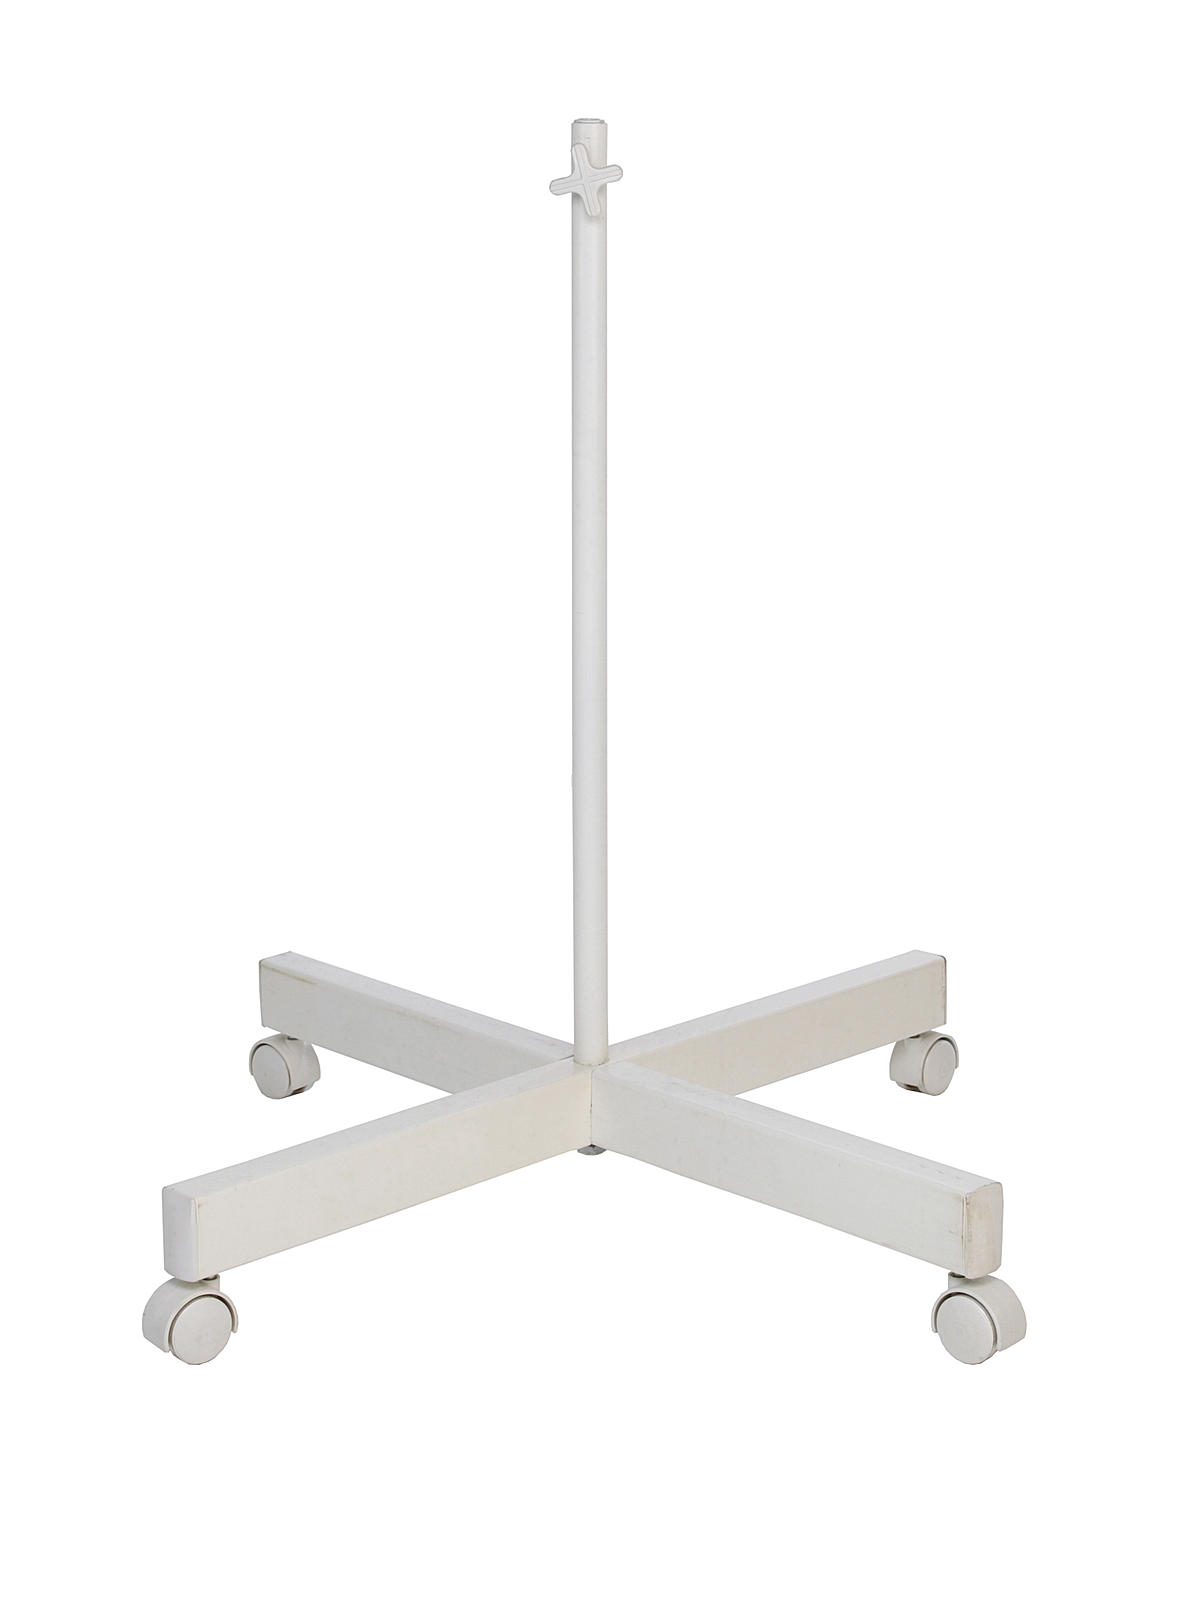 Ultra Slim Fluorescent Lamp And Accessories 4-spoke Floorstand White 29.5 In High